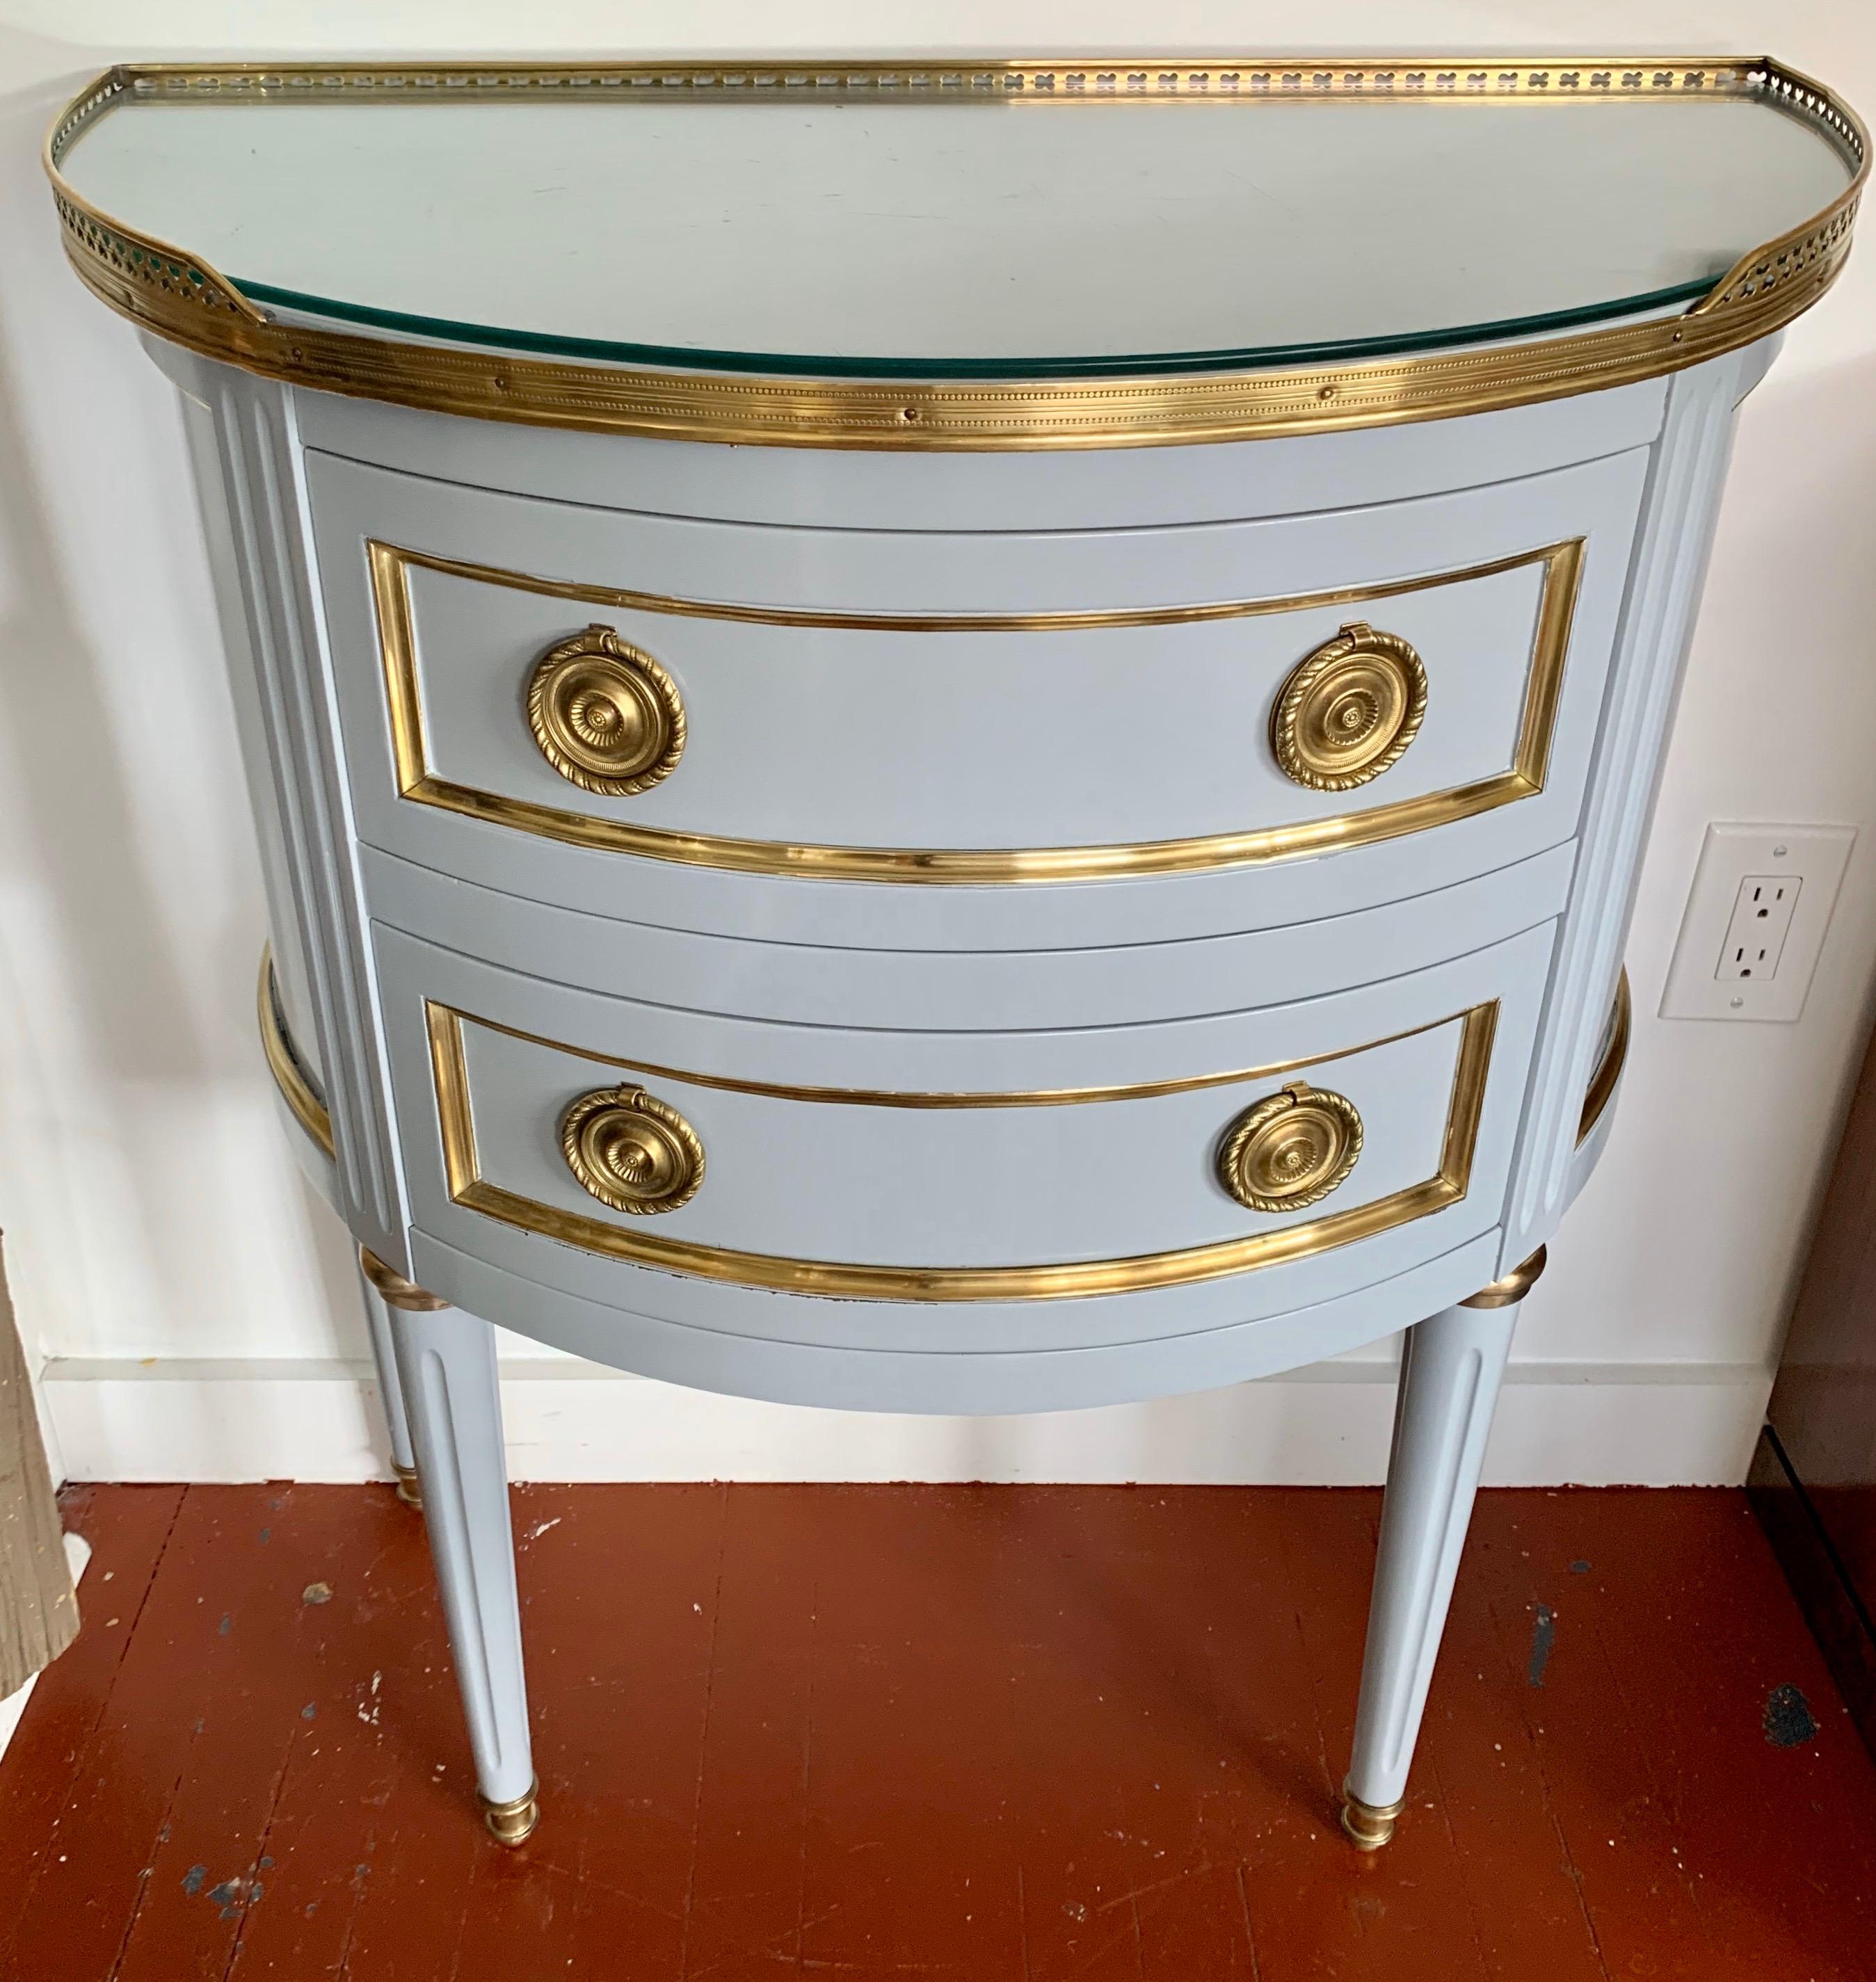 Stunning newly lacquered small demilune chest that originally came from the Ritz Carlton Hotels.
The powder blue lacquer has hints of gray and the brass is gorgeous. Great lines and better scale.
It features two drawers for storage.